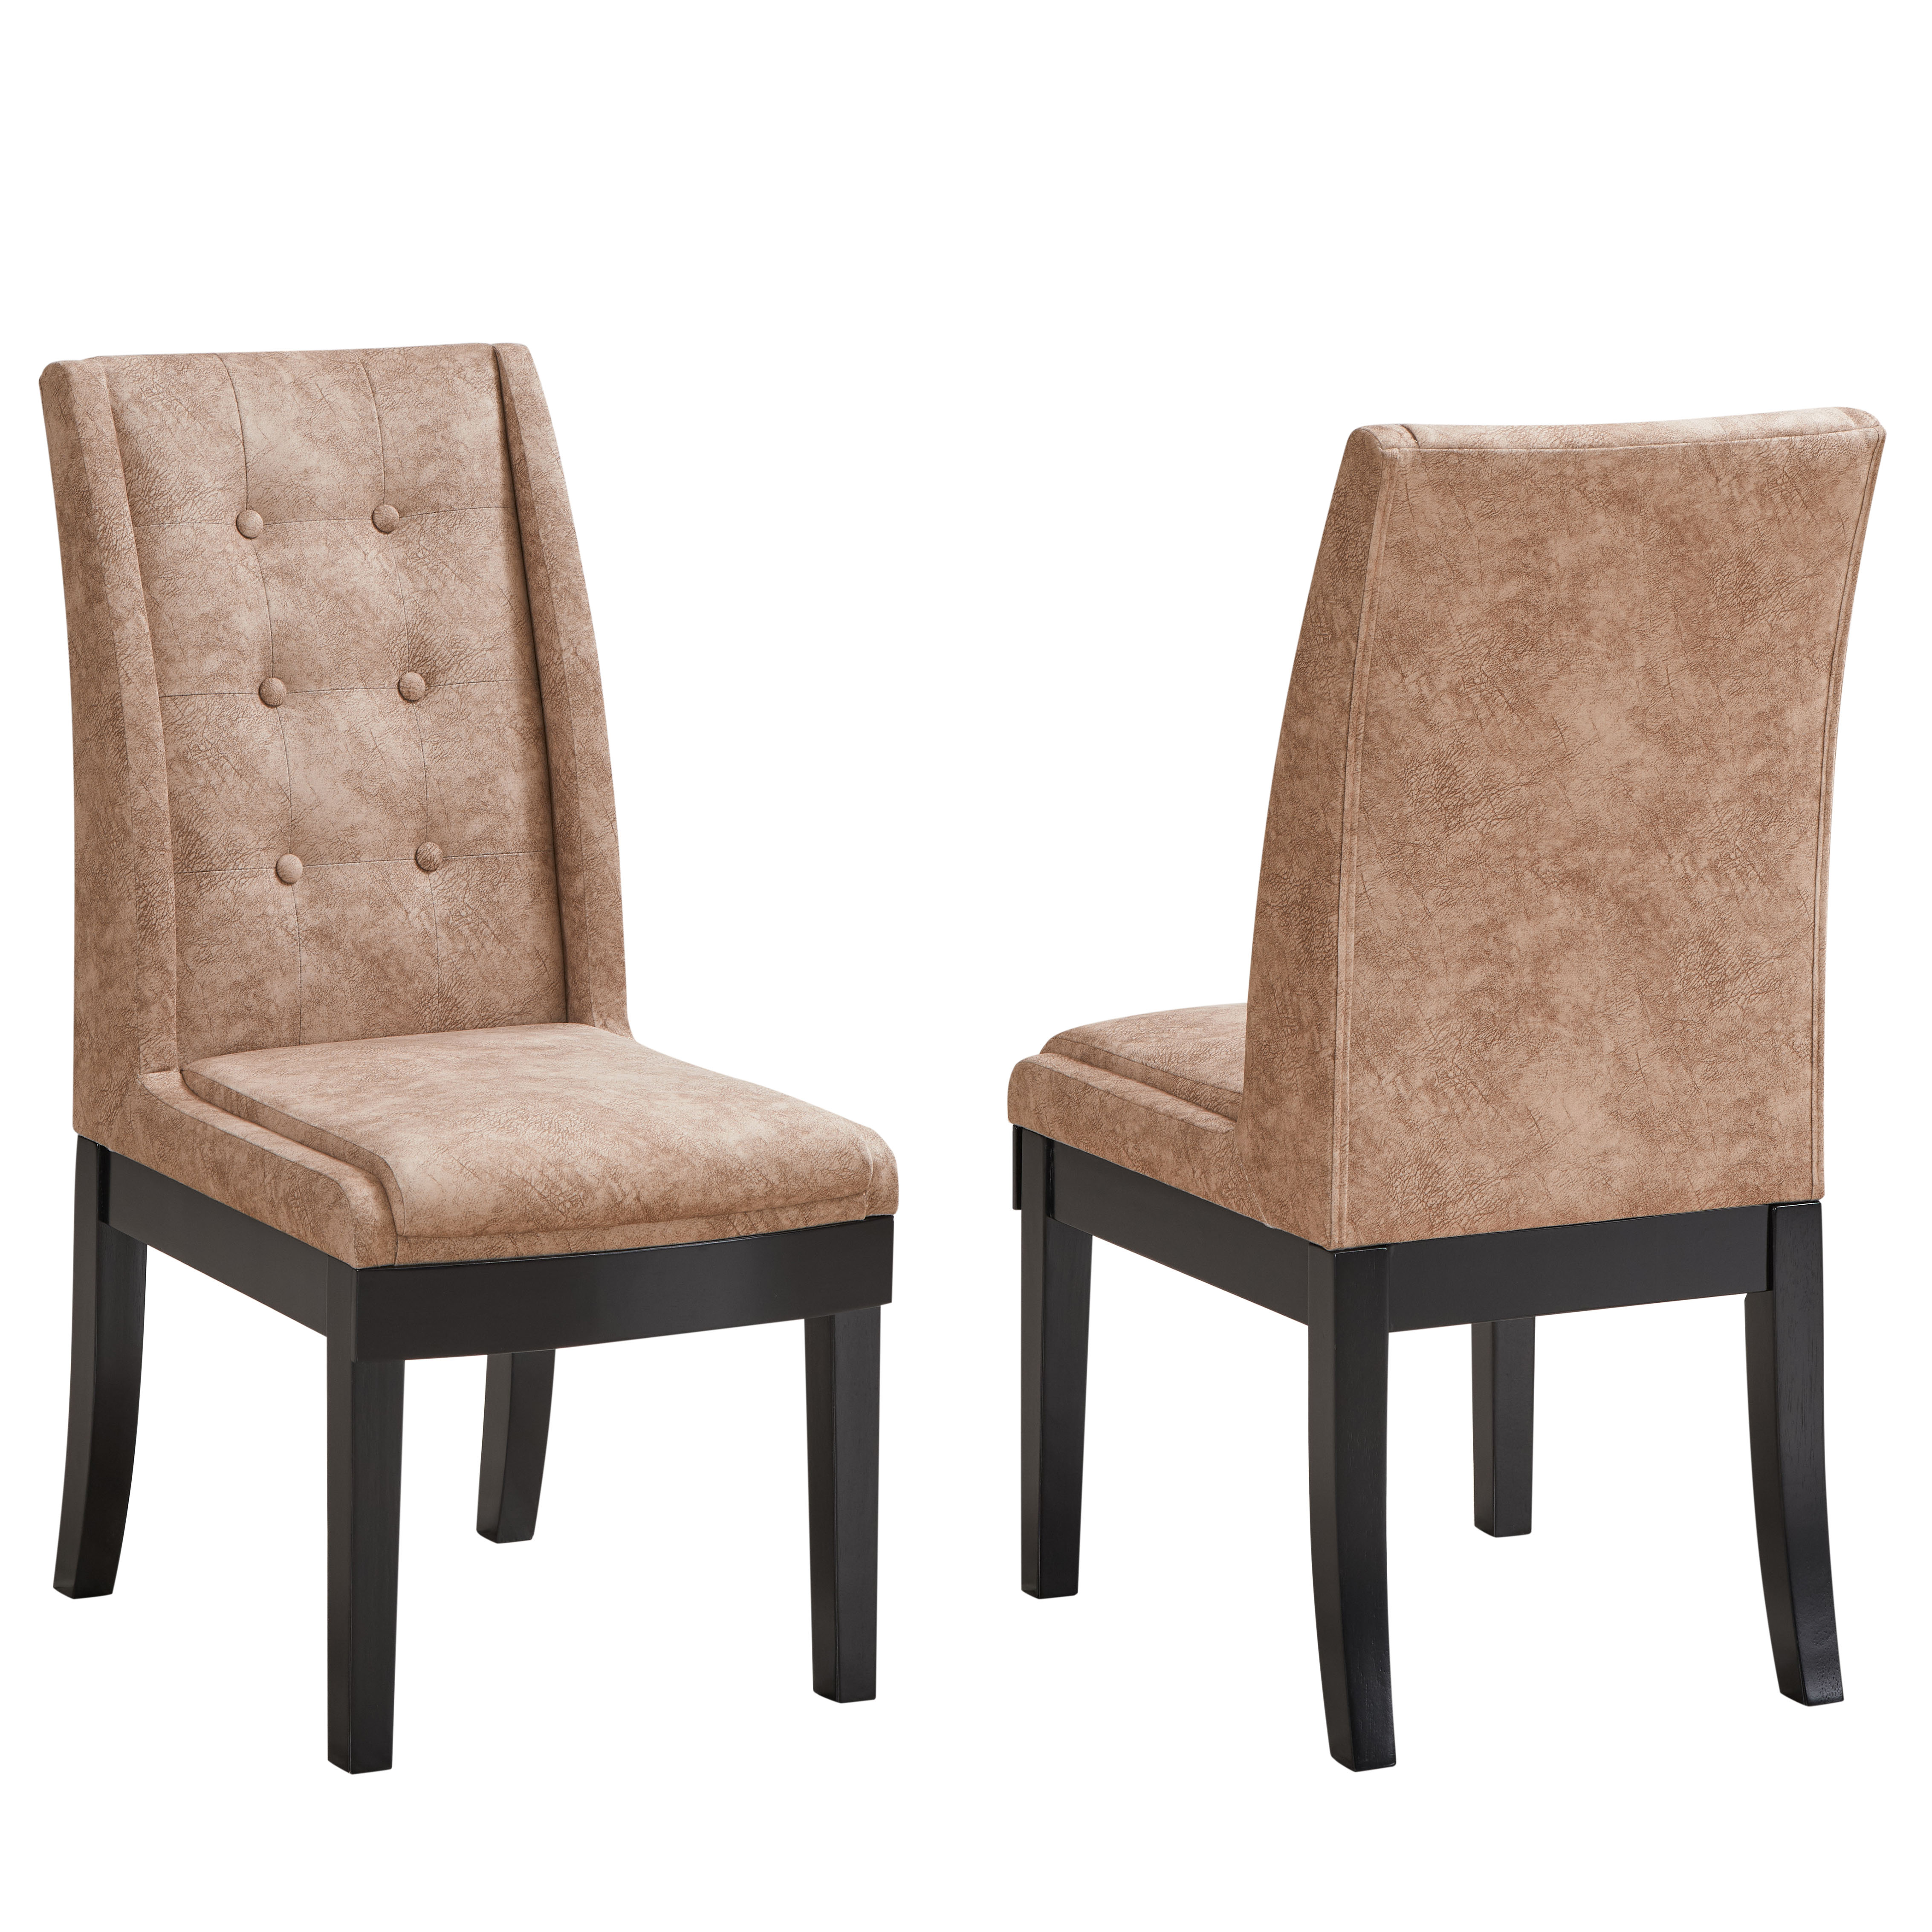 Bierce Dining Chairs (Light Brown) - Set of 2